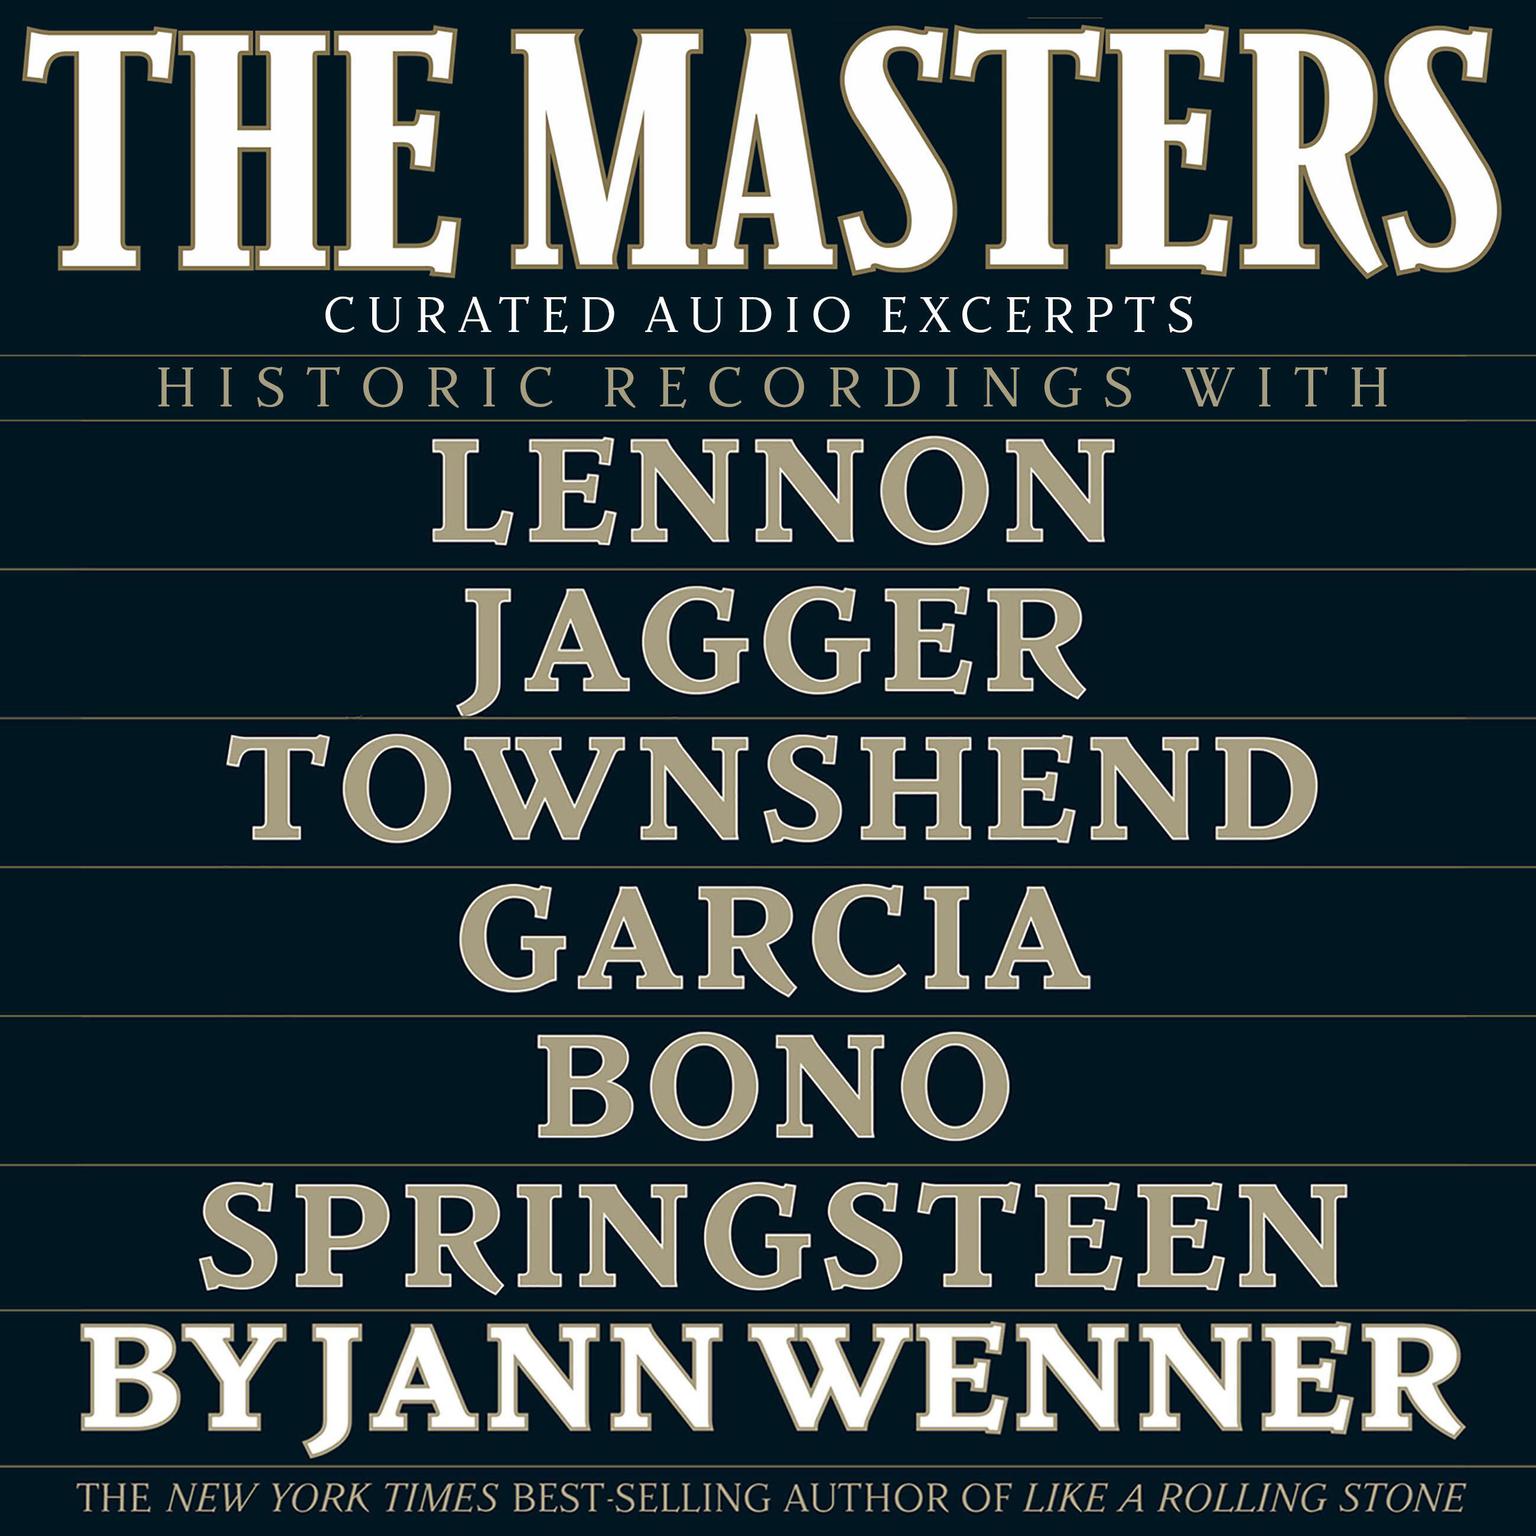 The Masters: Curated Audio Excerpts: Historic recordings with Lennon, Jagger, Townshend, Garcia, Bono, and Springsteen Audiobook, by Jann S. Wenner